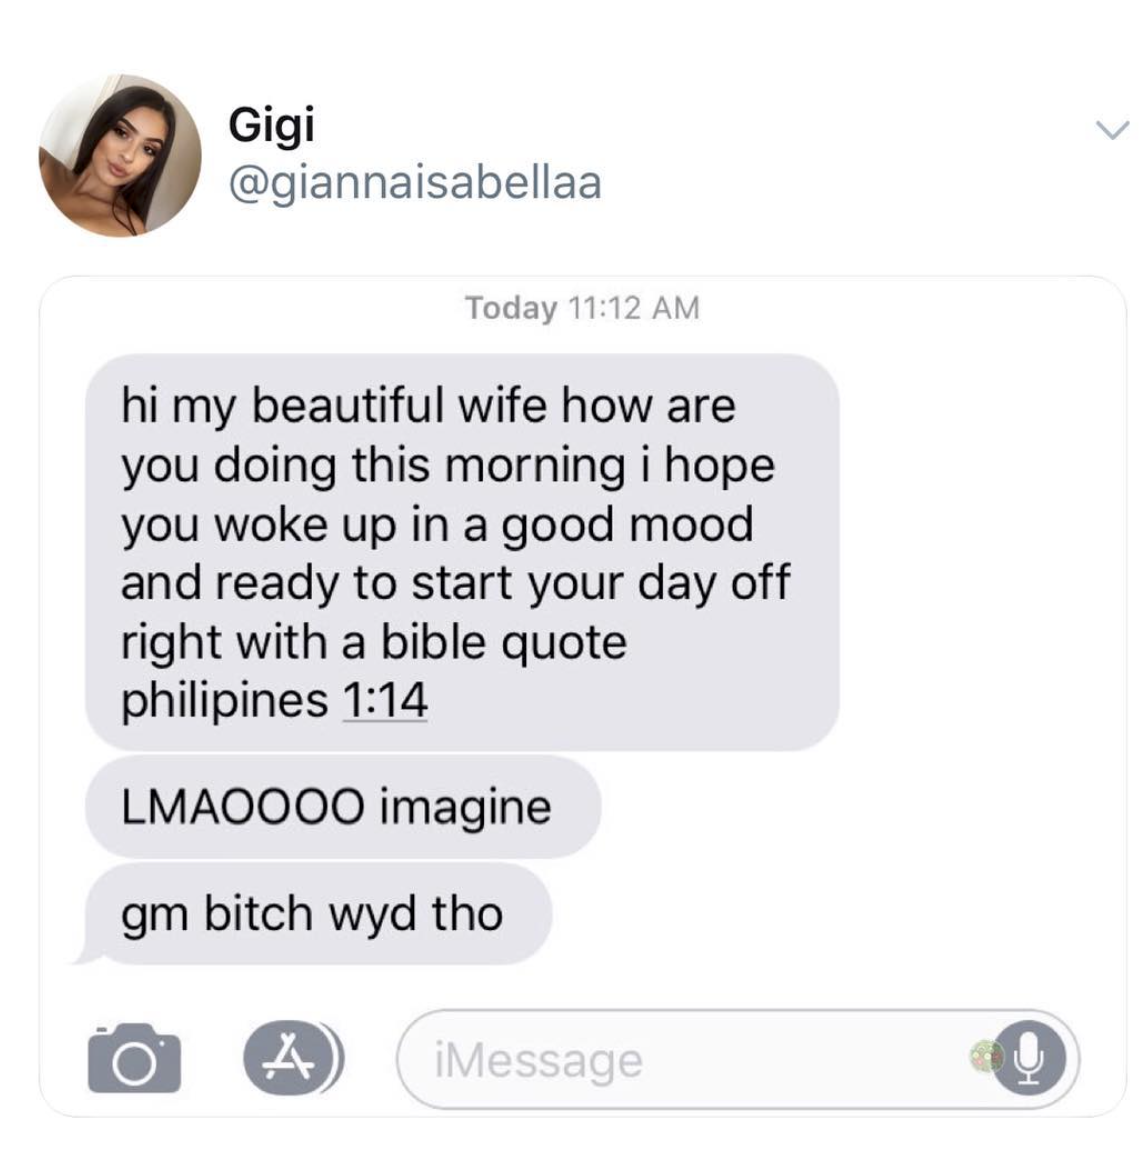 communication - Gigi Today hi my beautiful wife how are you doing this morning i hope you woke up in a good mood and ready to start your day off right with a bible quote philipines Lmaoooo imagine gm bitch wyd tho iMessage